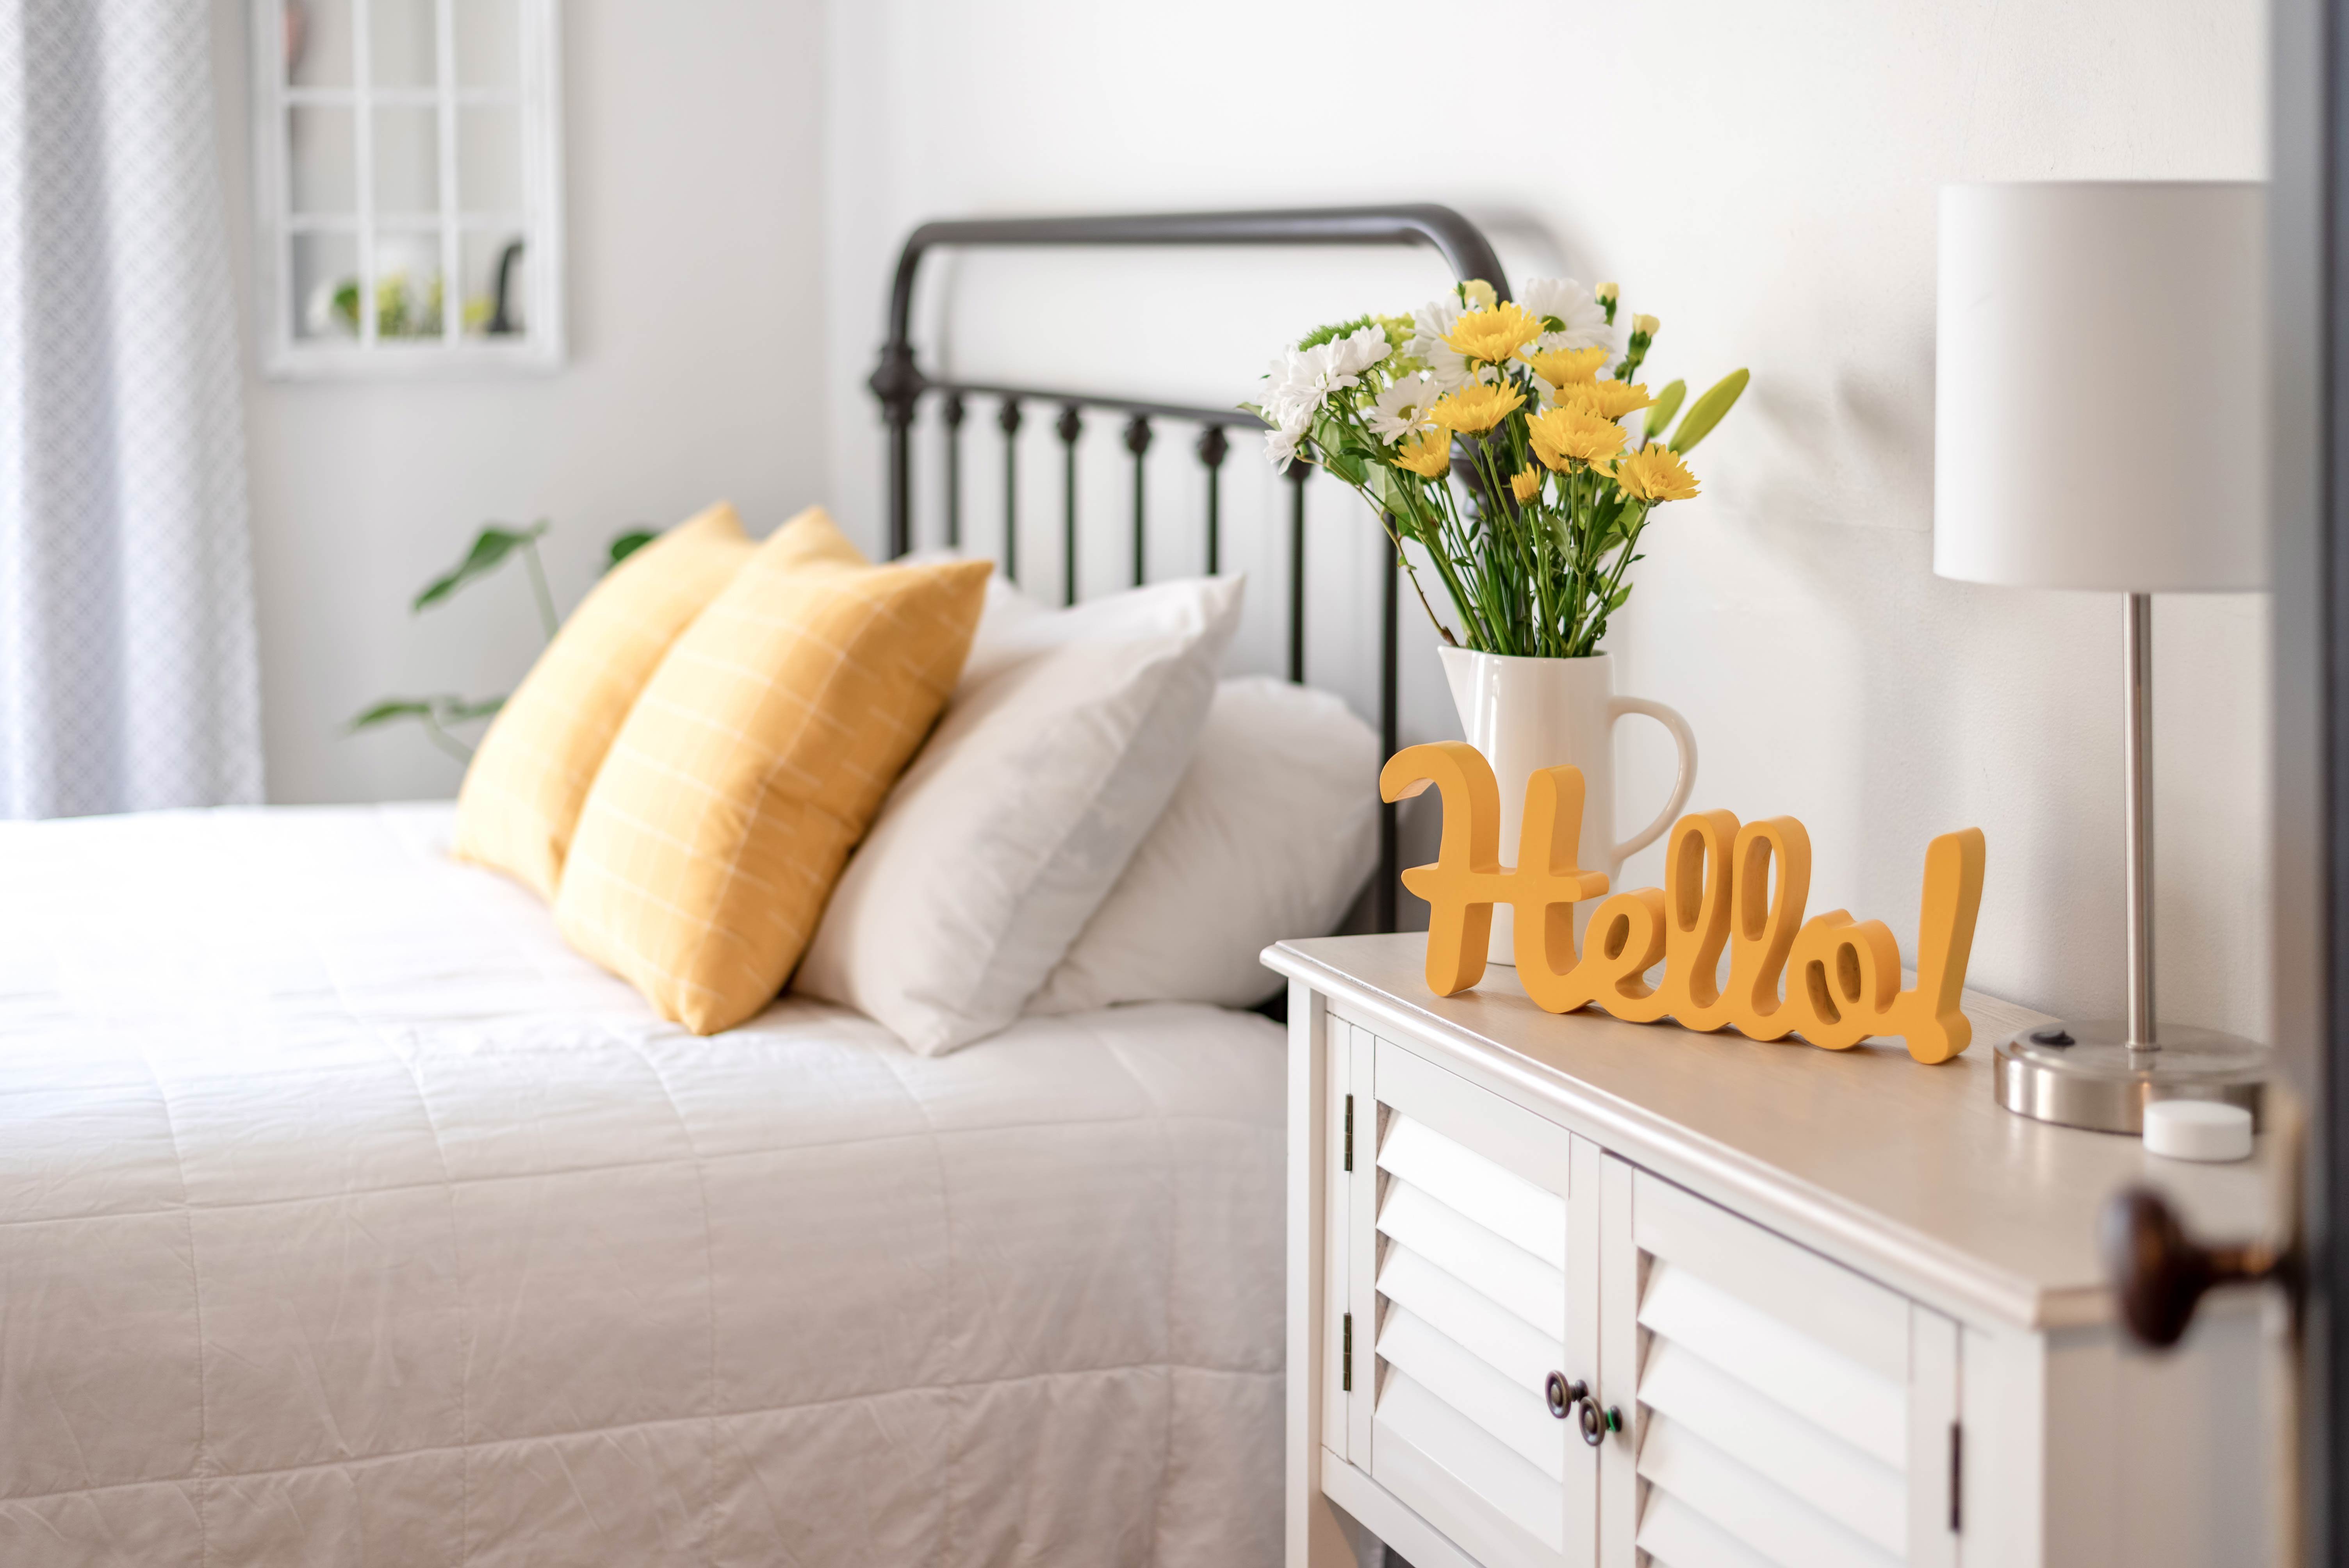 Cheerful hello sign in clean and bright bedroom with yellow accents